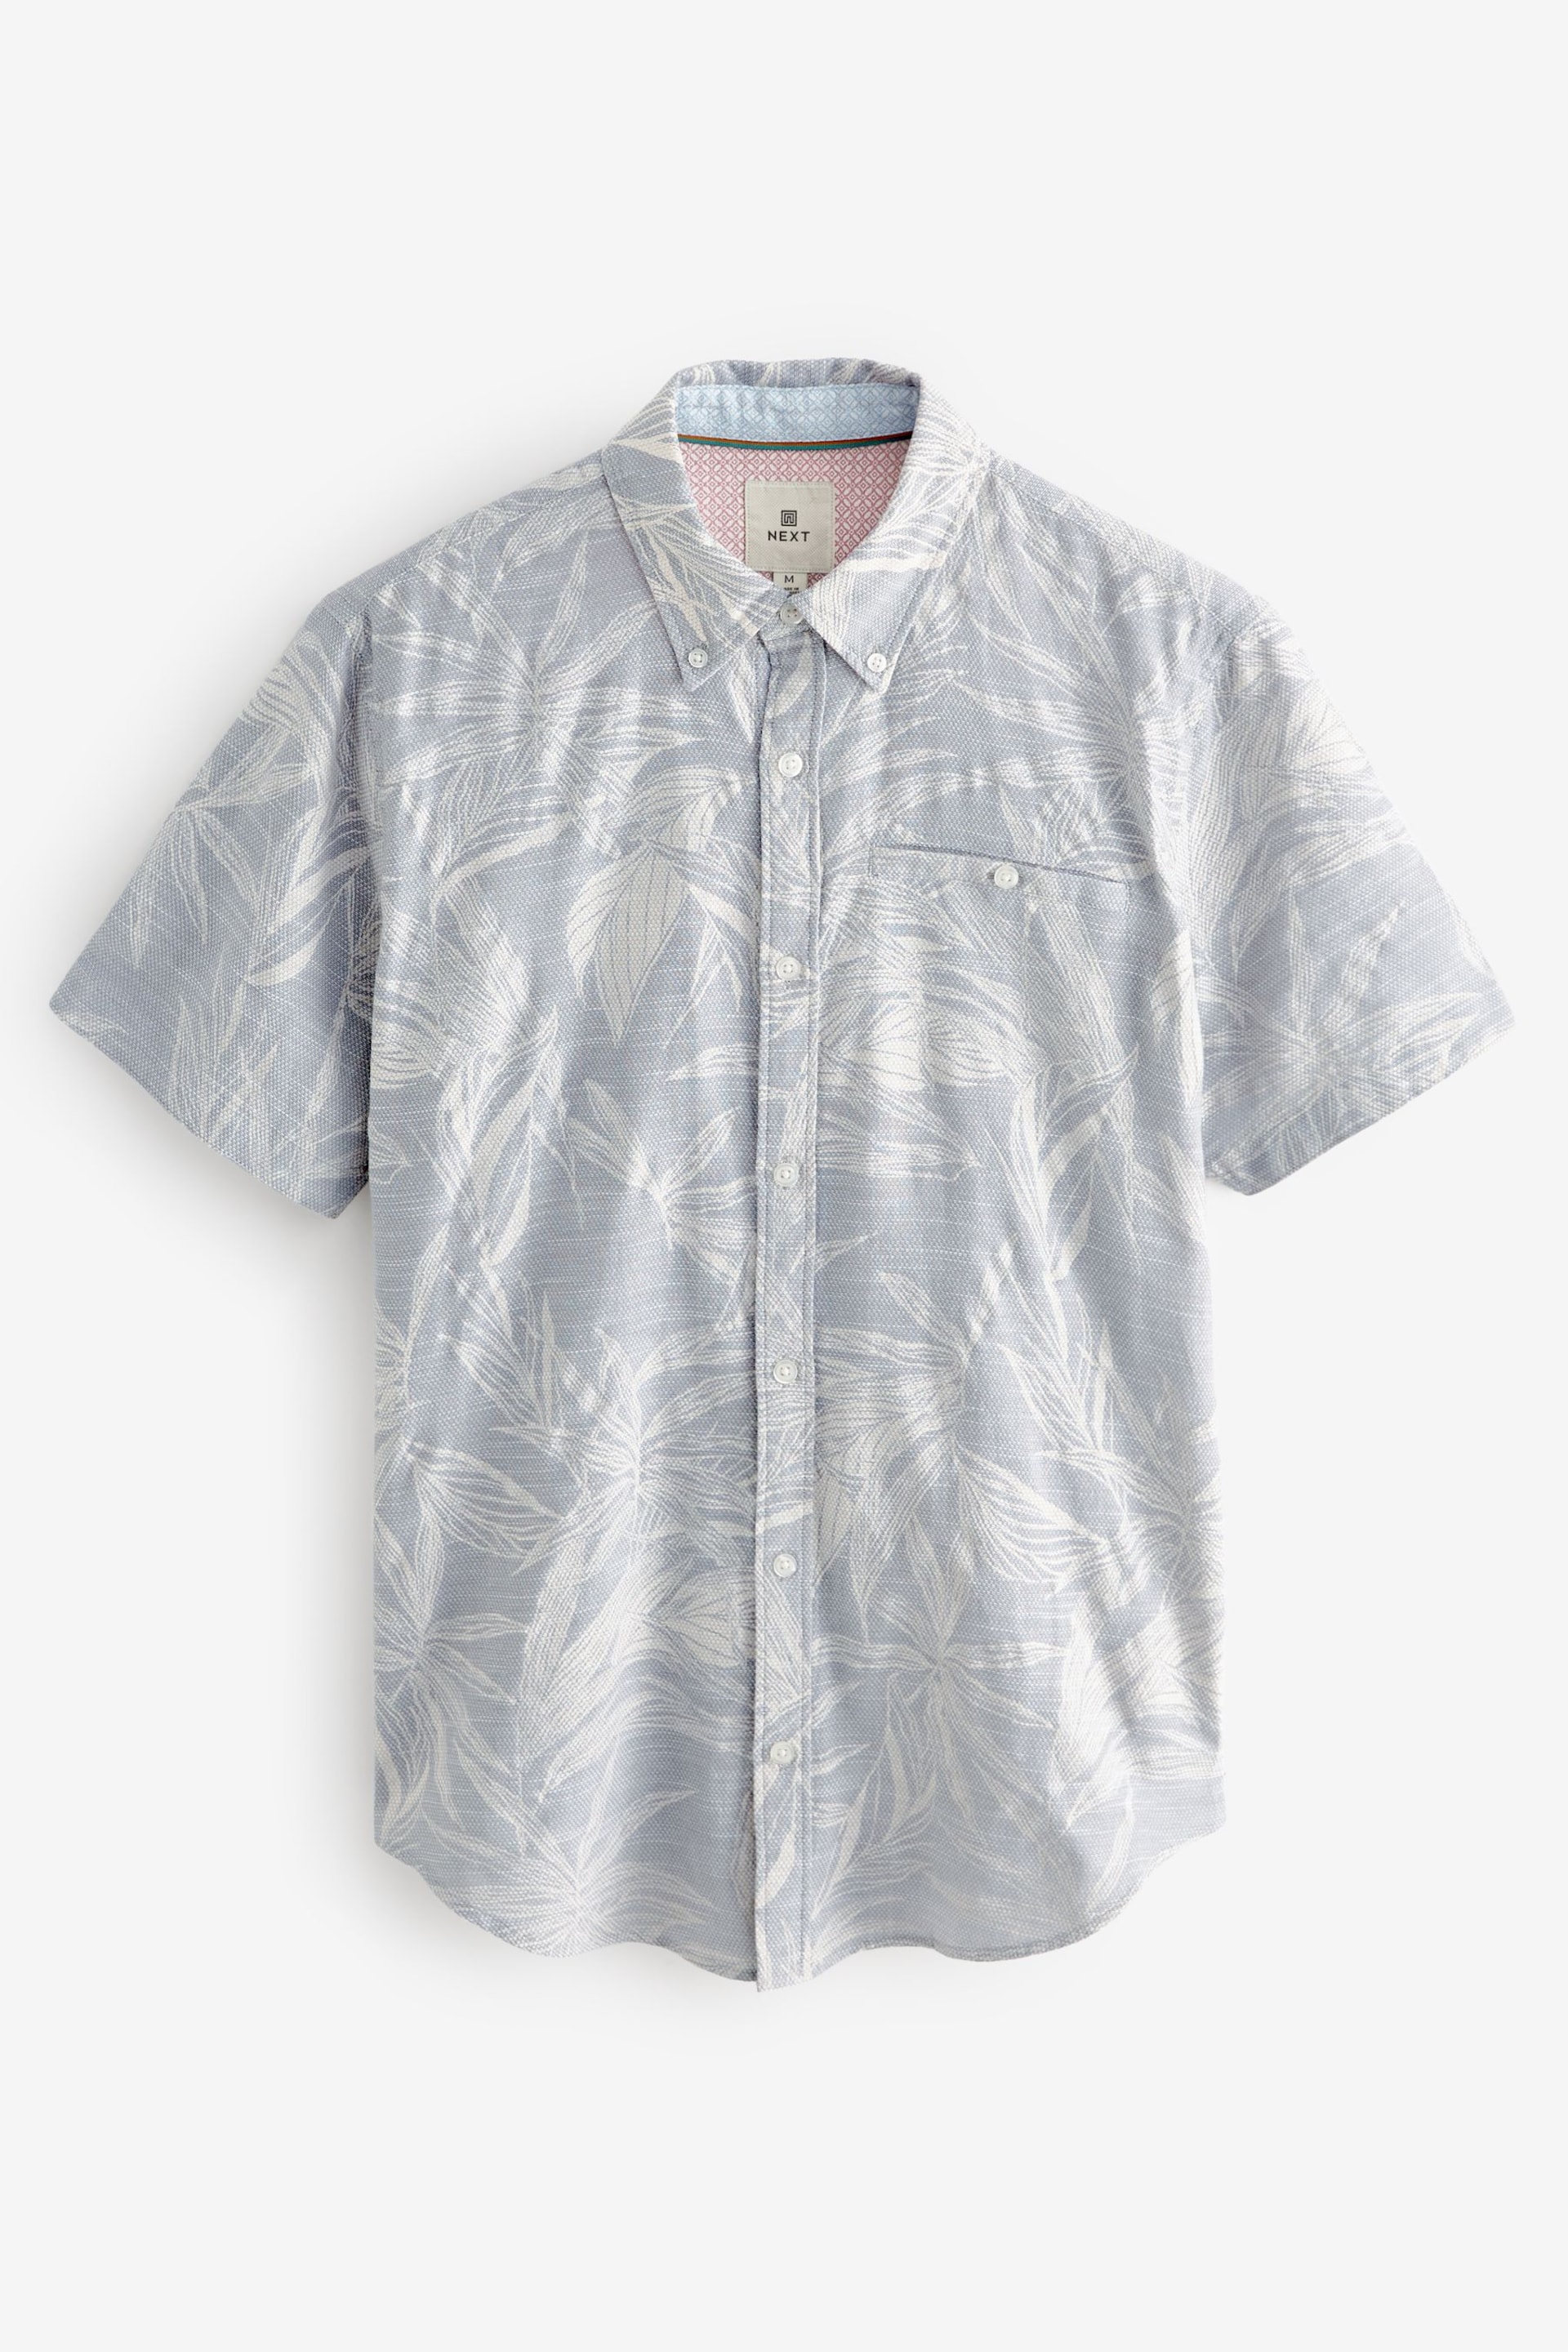 Grey Textured Floral Short Sleeve Shirt - Image 5 of 7